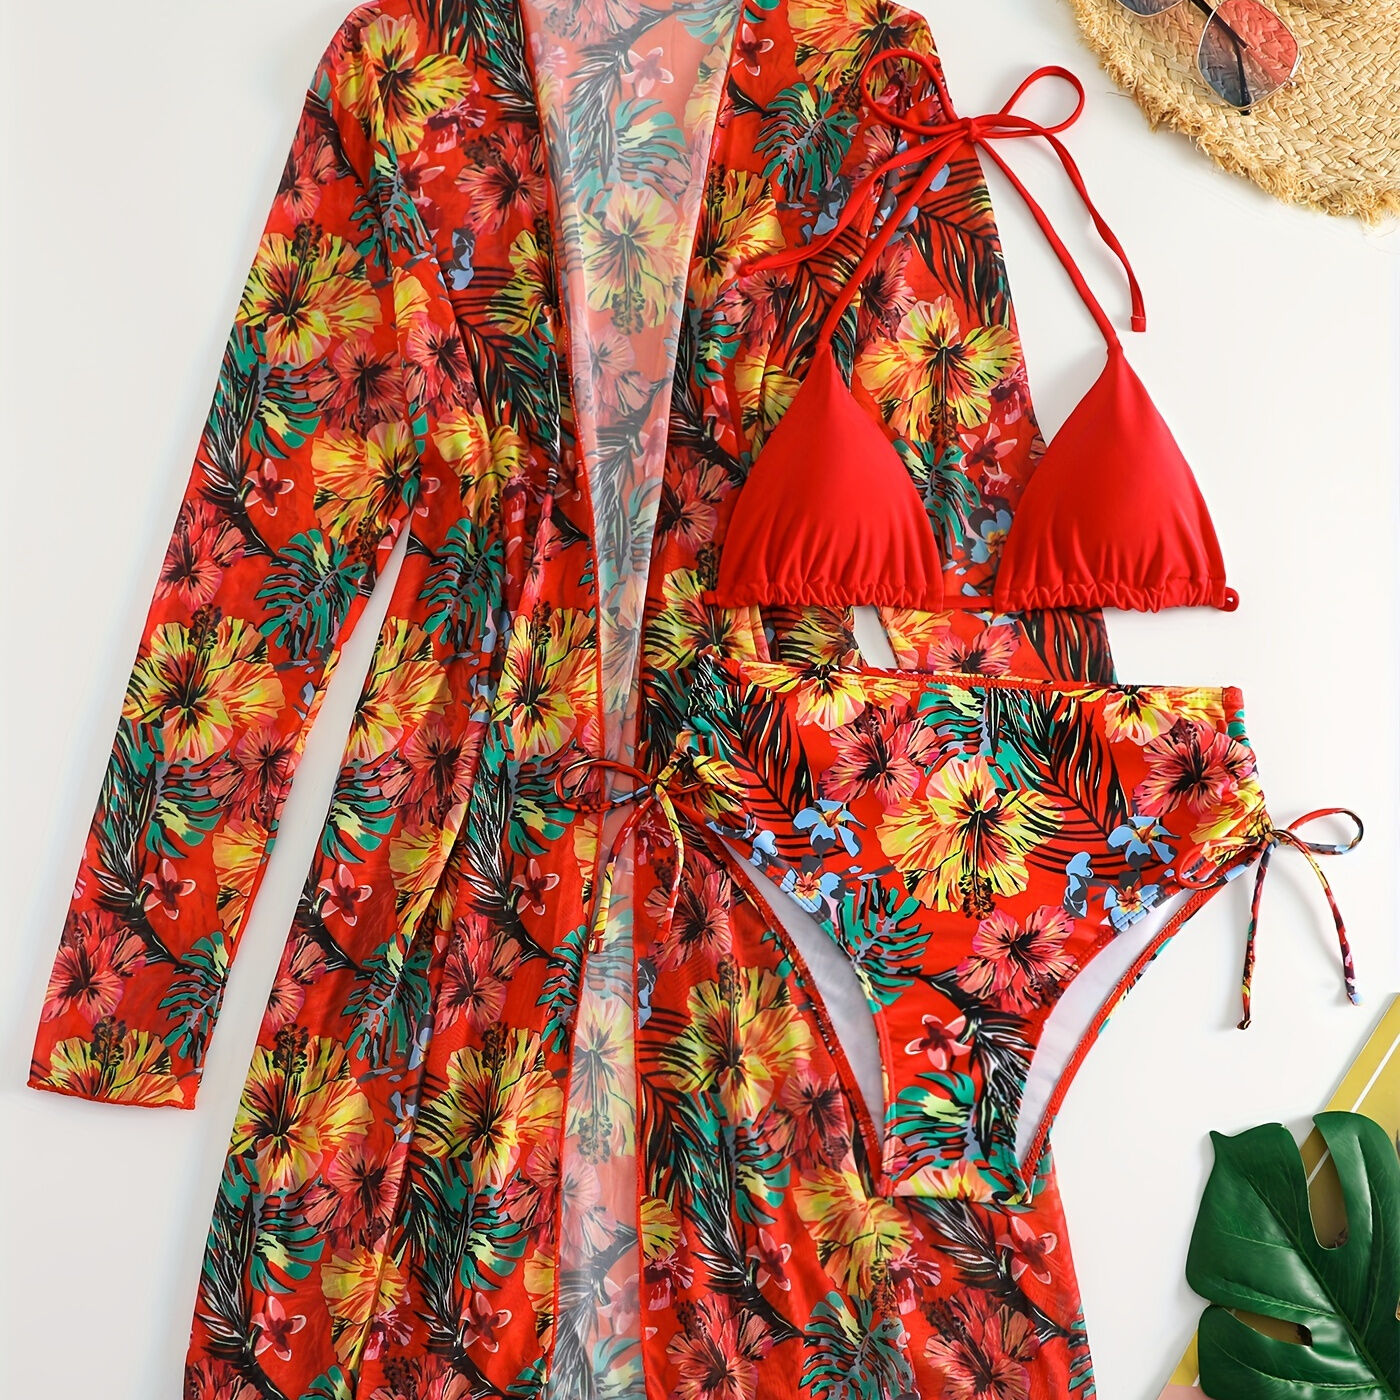 Temu 3-pieces Tropical Print Bikini Sets, Halter Neck Tie Back Tie Side High Cut With Cover Up Shirt Swimsuit, Women's Swimwear & Clothing Triangle Top Rose Red XL